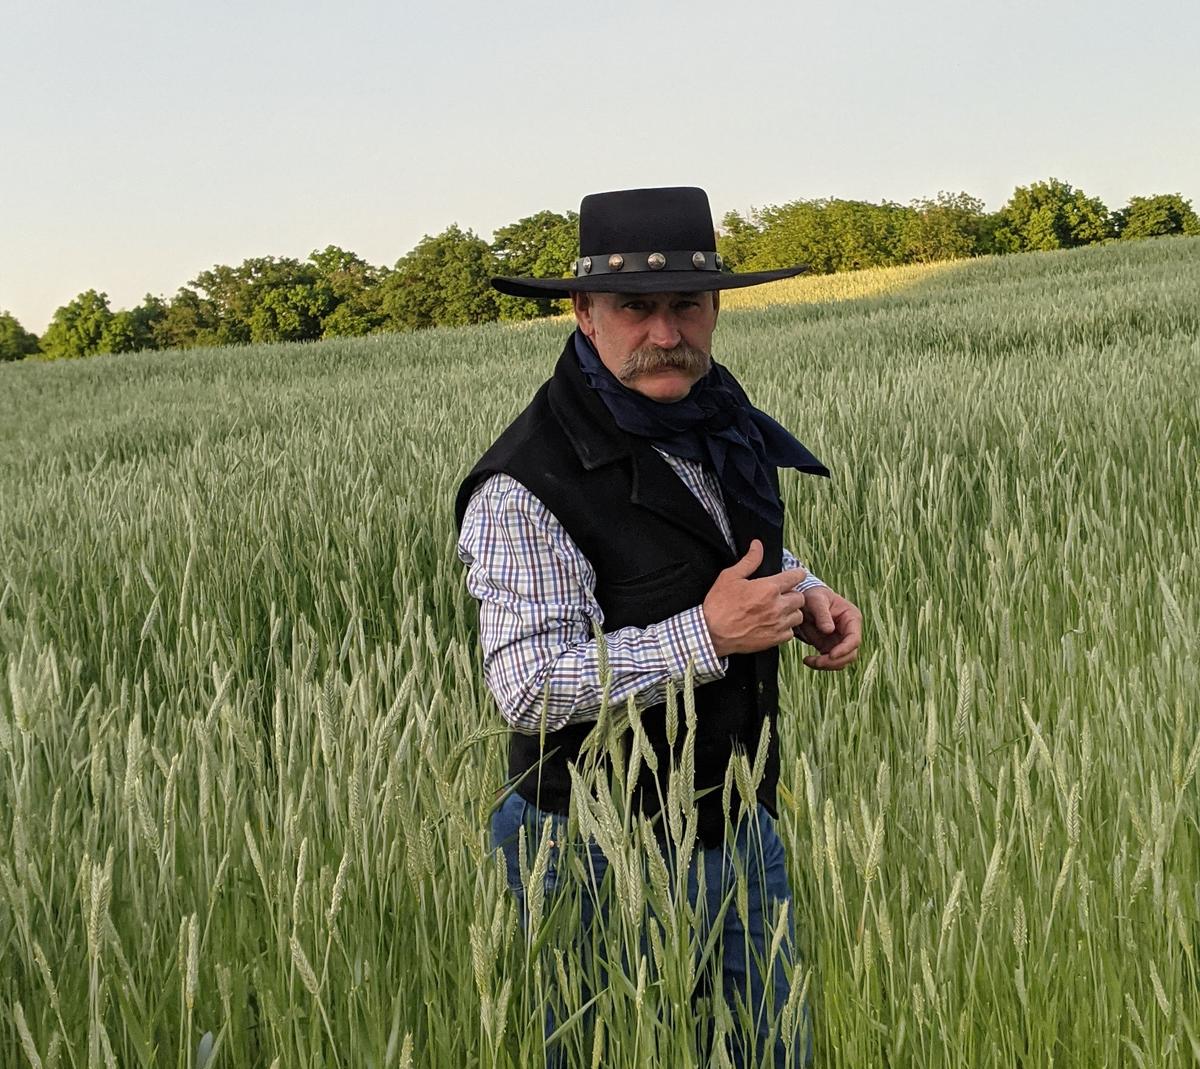 Trent Loos, 55, is a sixth generation rancher whose ancestors emigrated from Germany to America in the 1830s. (Courtesy of <a href="https://www.loostalesmedia.com/">Trent Loos</a>)